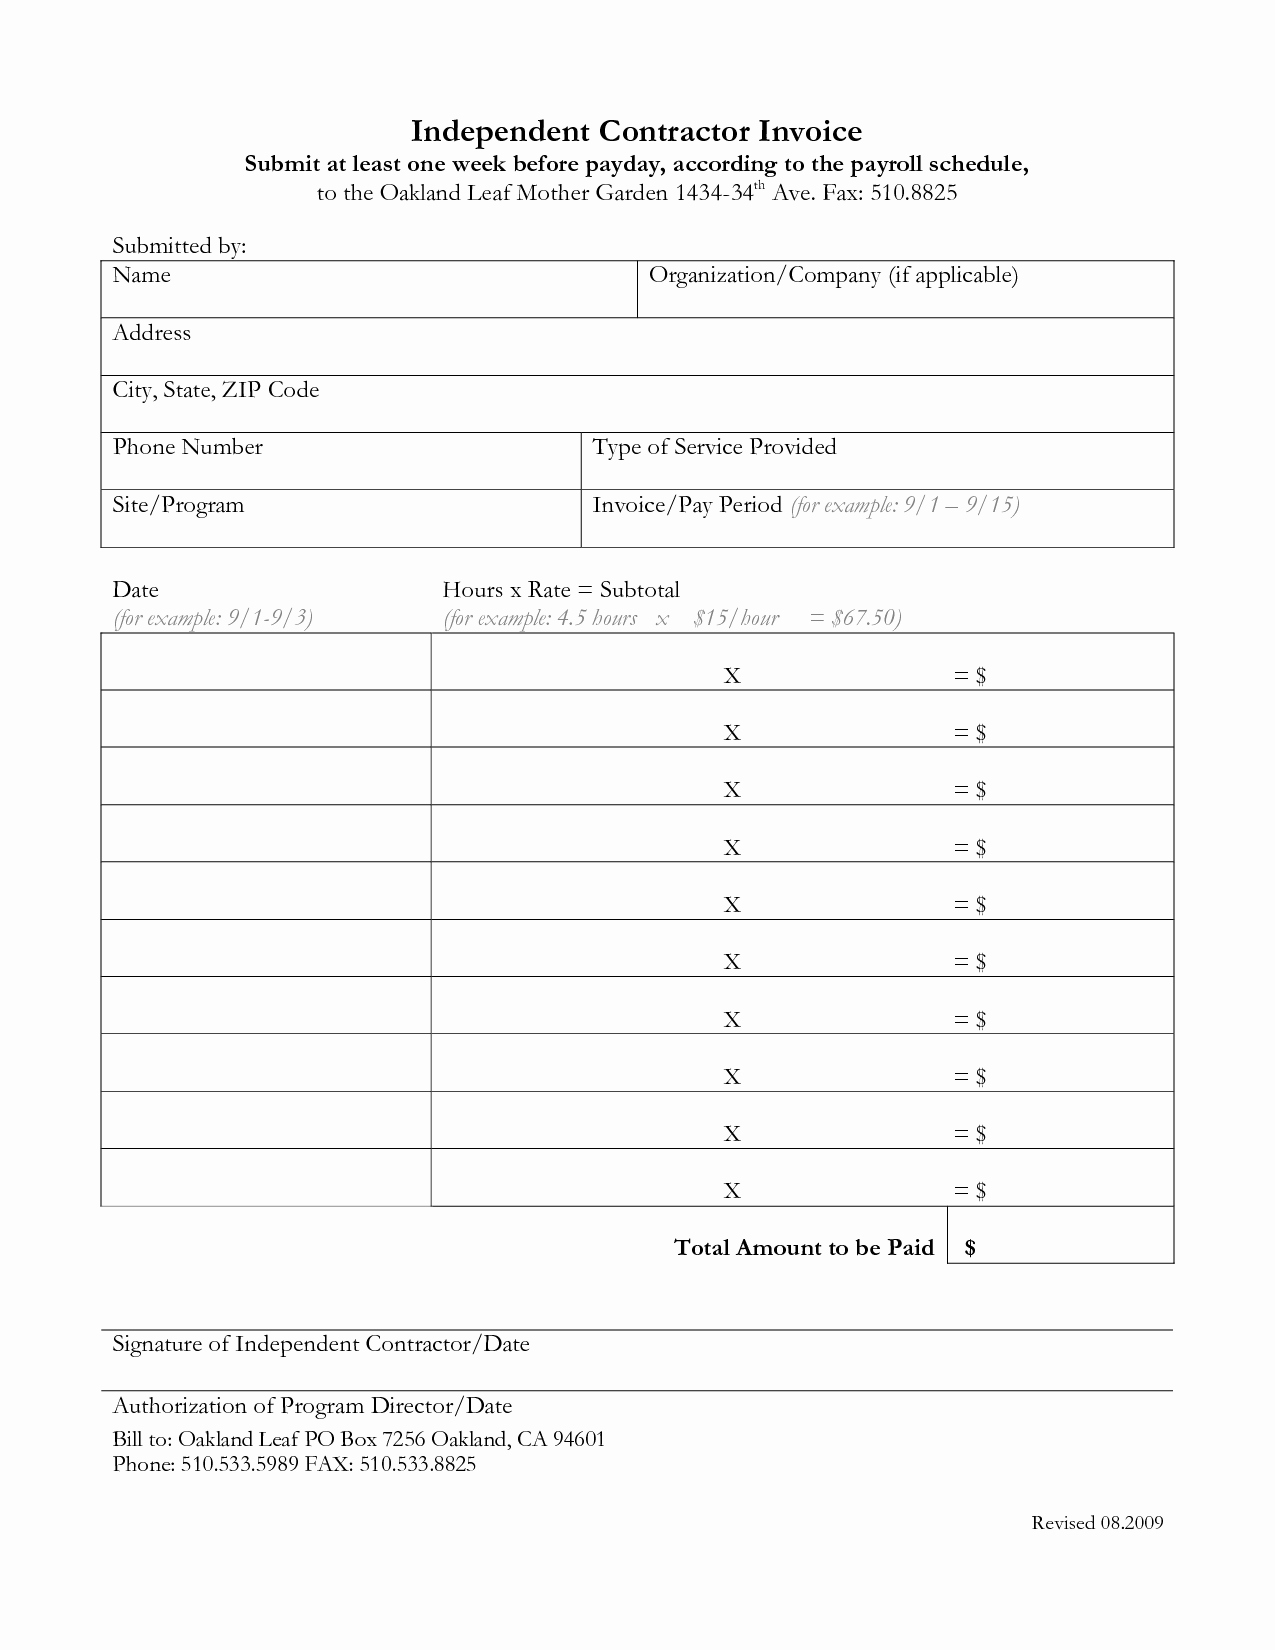 Free Contractor Invoice Template Best Of Independent Contractor Invoice Template Free